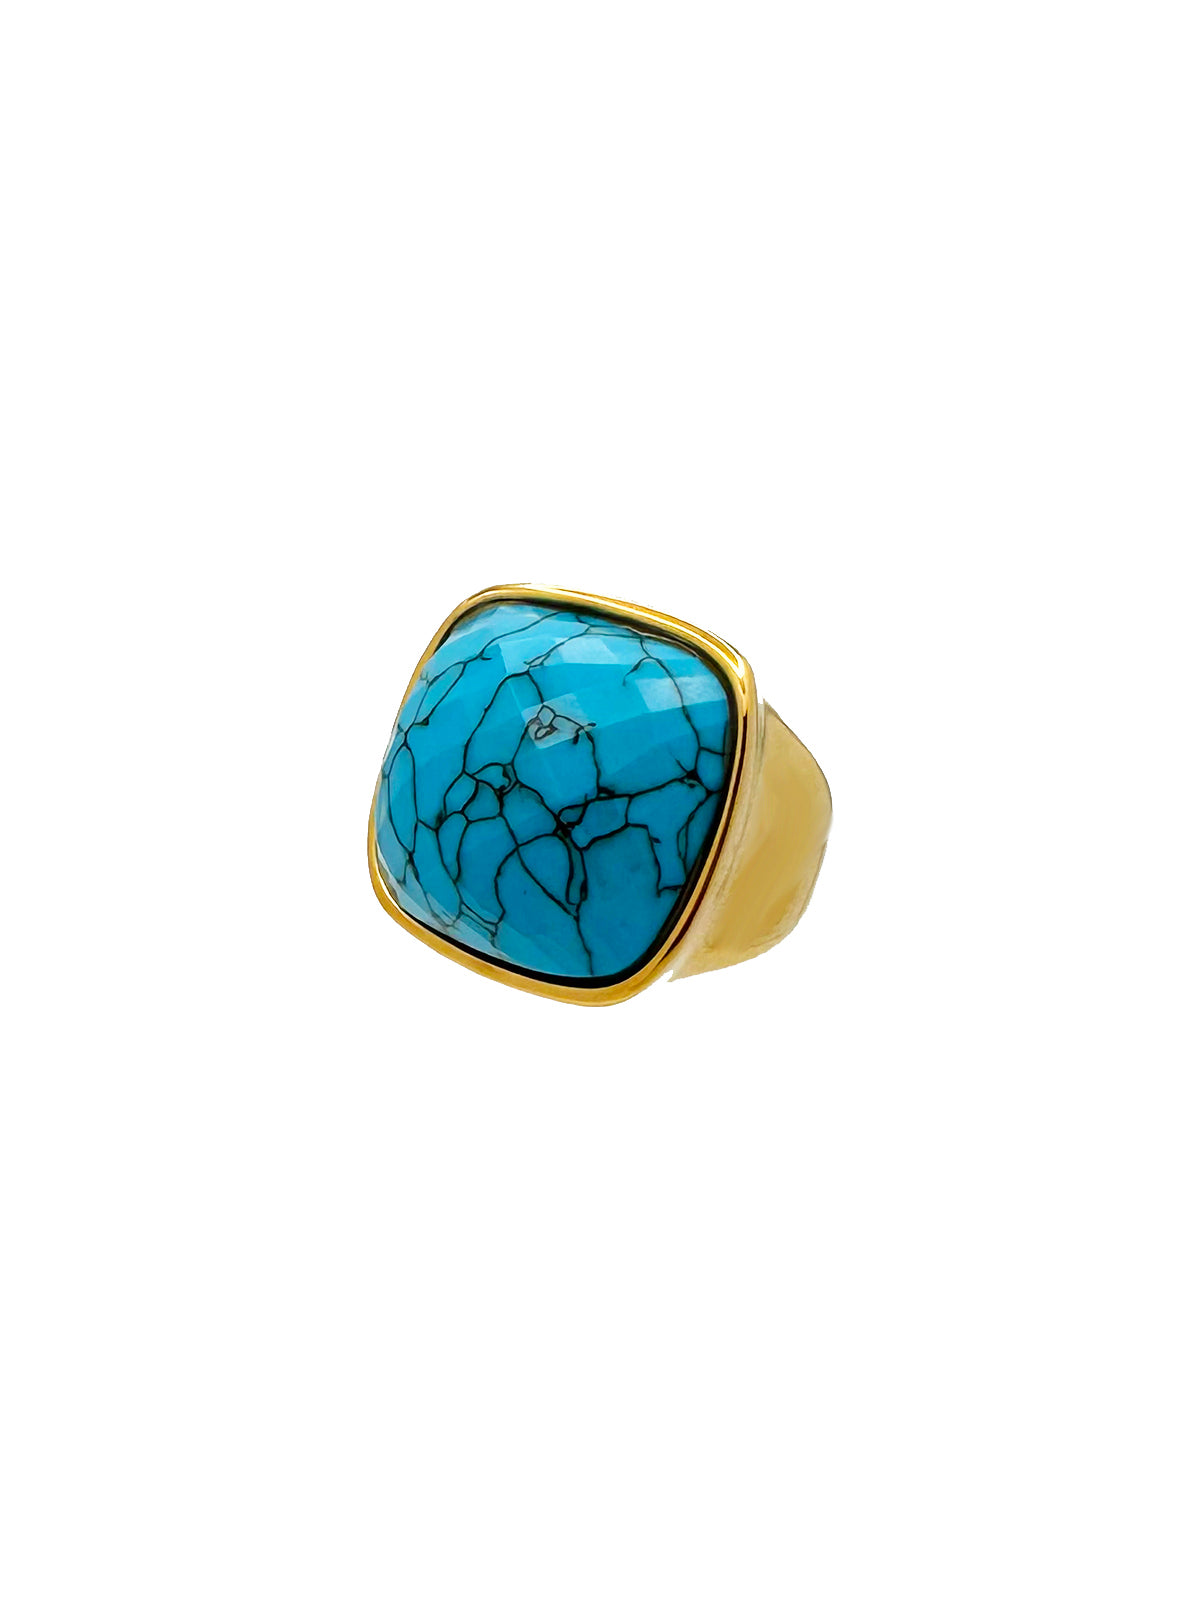 COCKTAIL RING - TURQUOISE